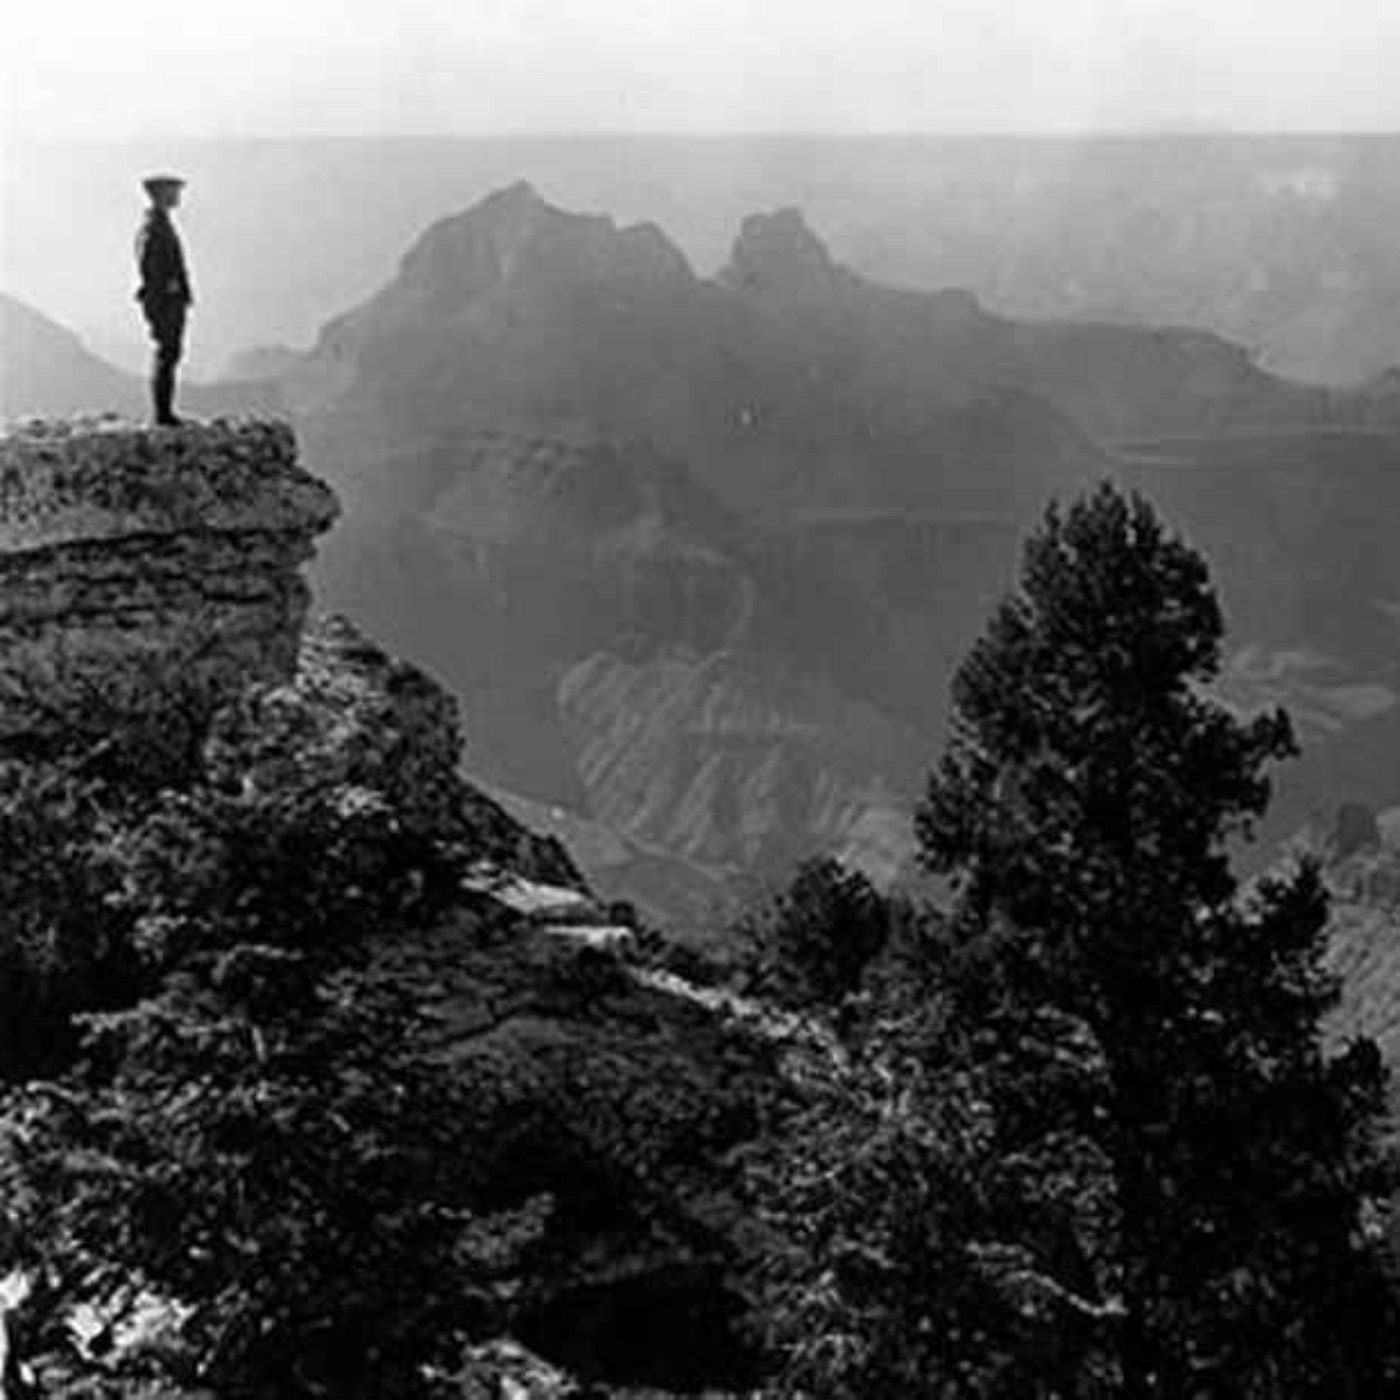 Woodrow Wilson and the Grand Canyon